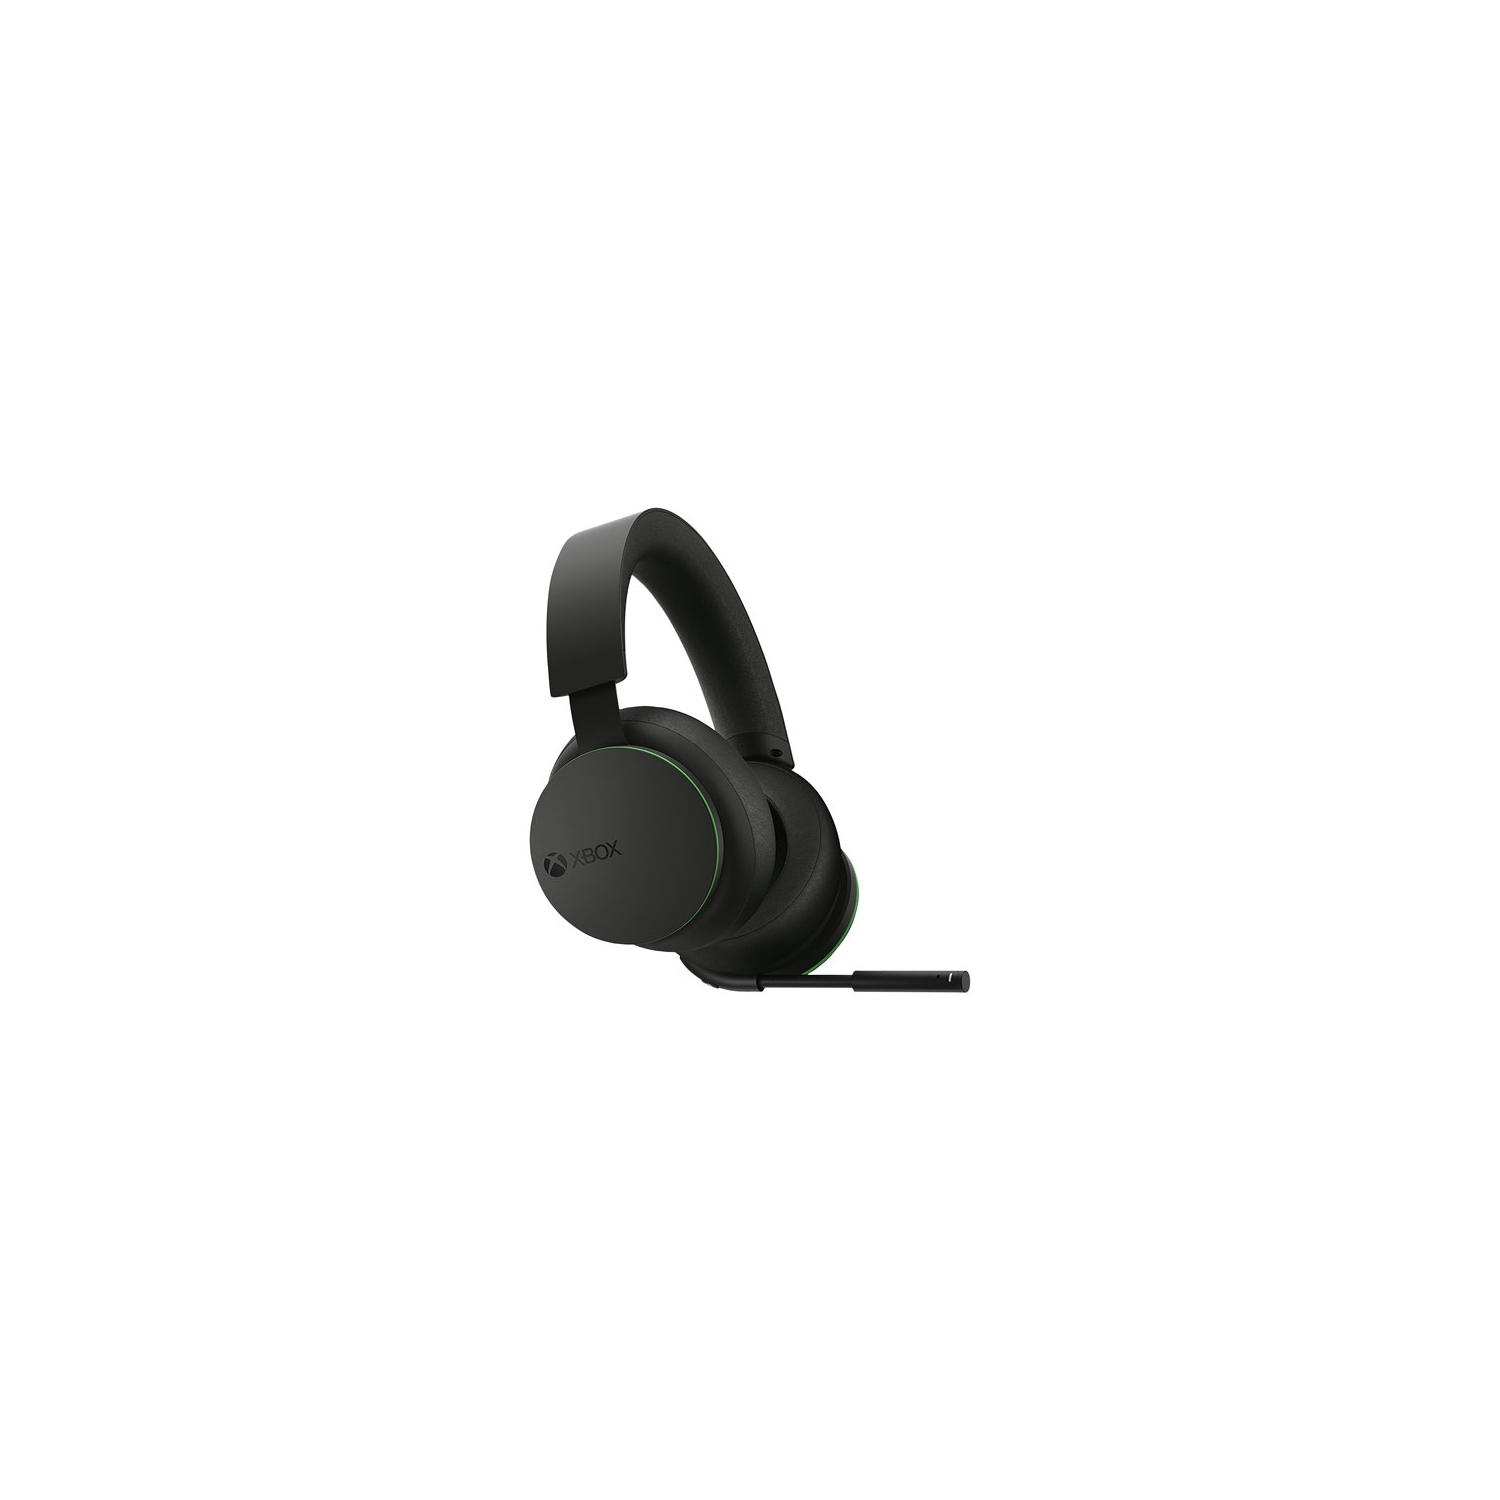 Refurbished (Excellent) - Xbox Wireless Headset for Xbox Series X|S / Xbox One / Windows 10